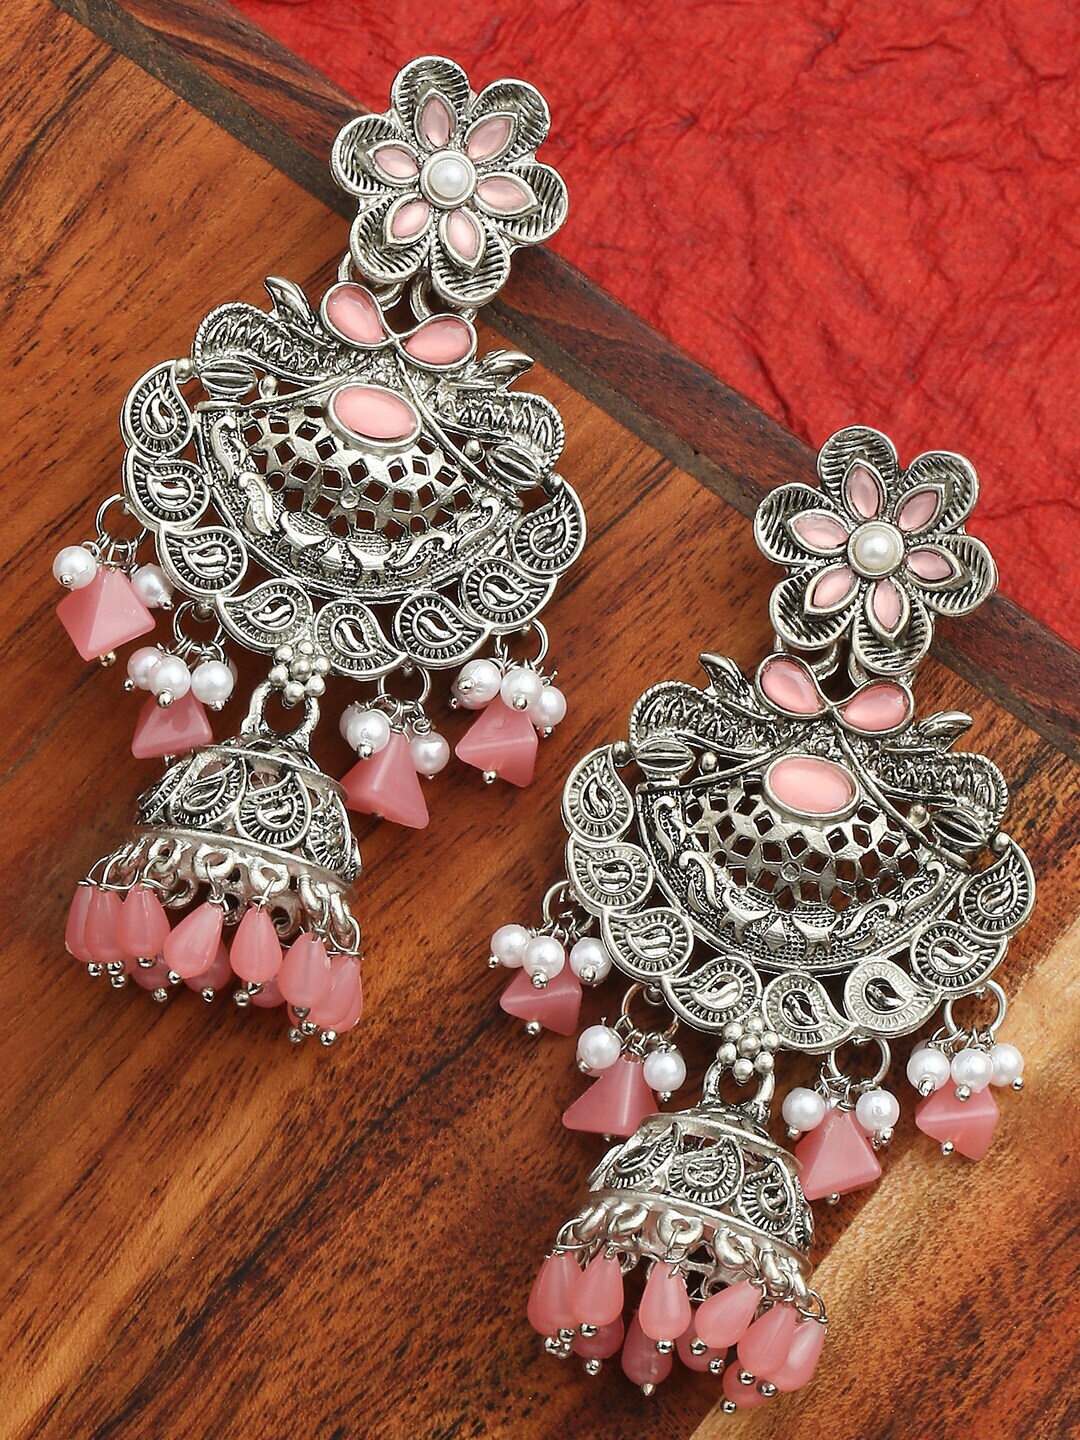 OOMPH Silver-Toned Dome Shaped Jhumkas Earrings Price in India